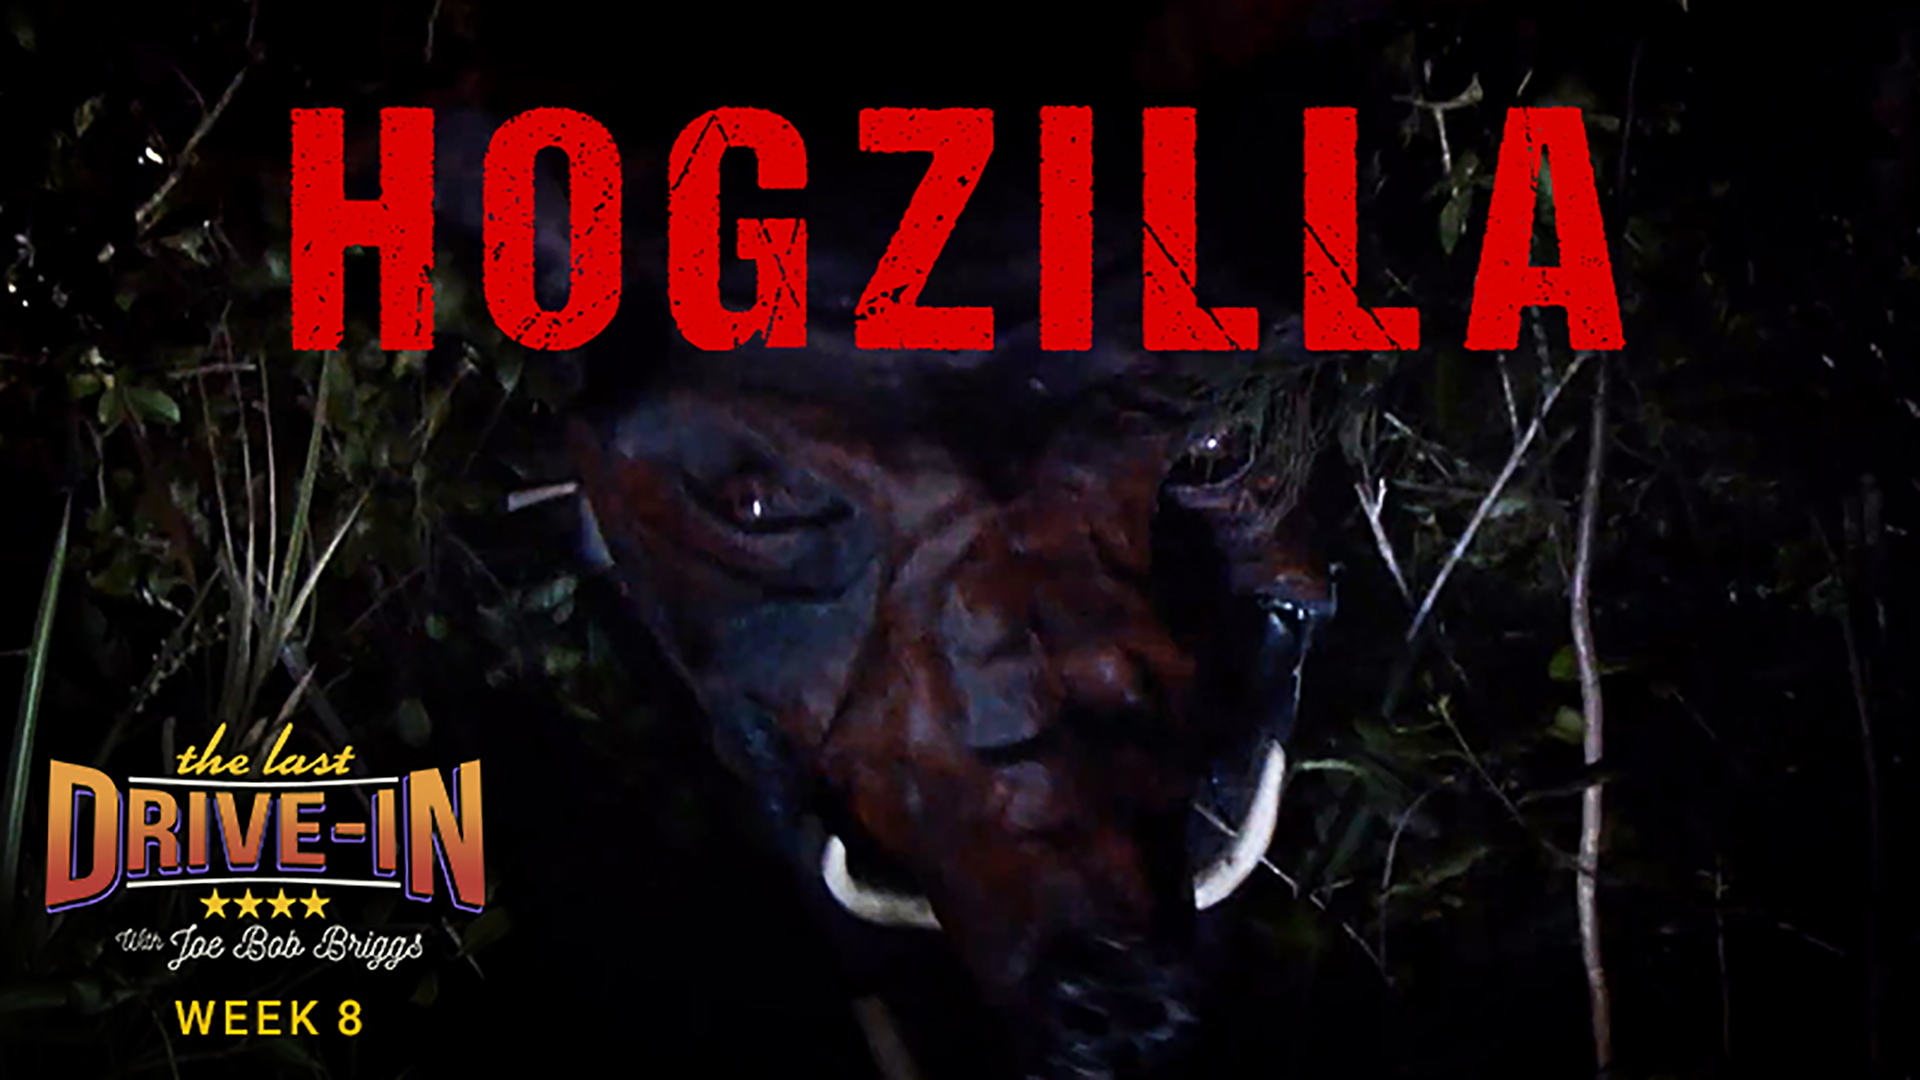 Week 8: Hogzilla, A news crew in search of a monstrous hog find more than they can handle in a Florida swamp., TV-MA, Season 1028422, Episode 16